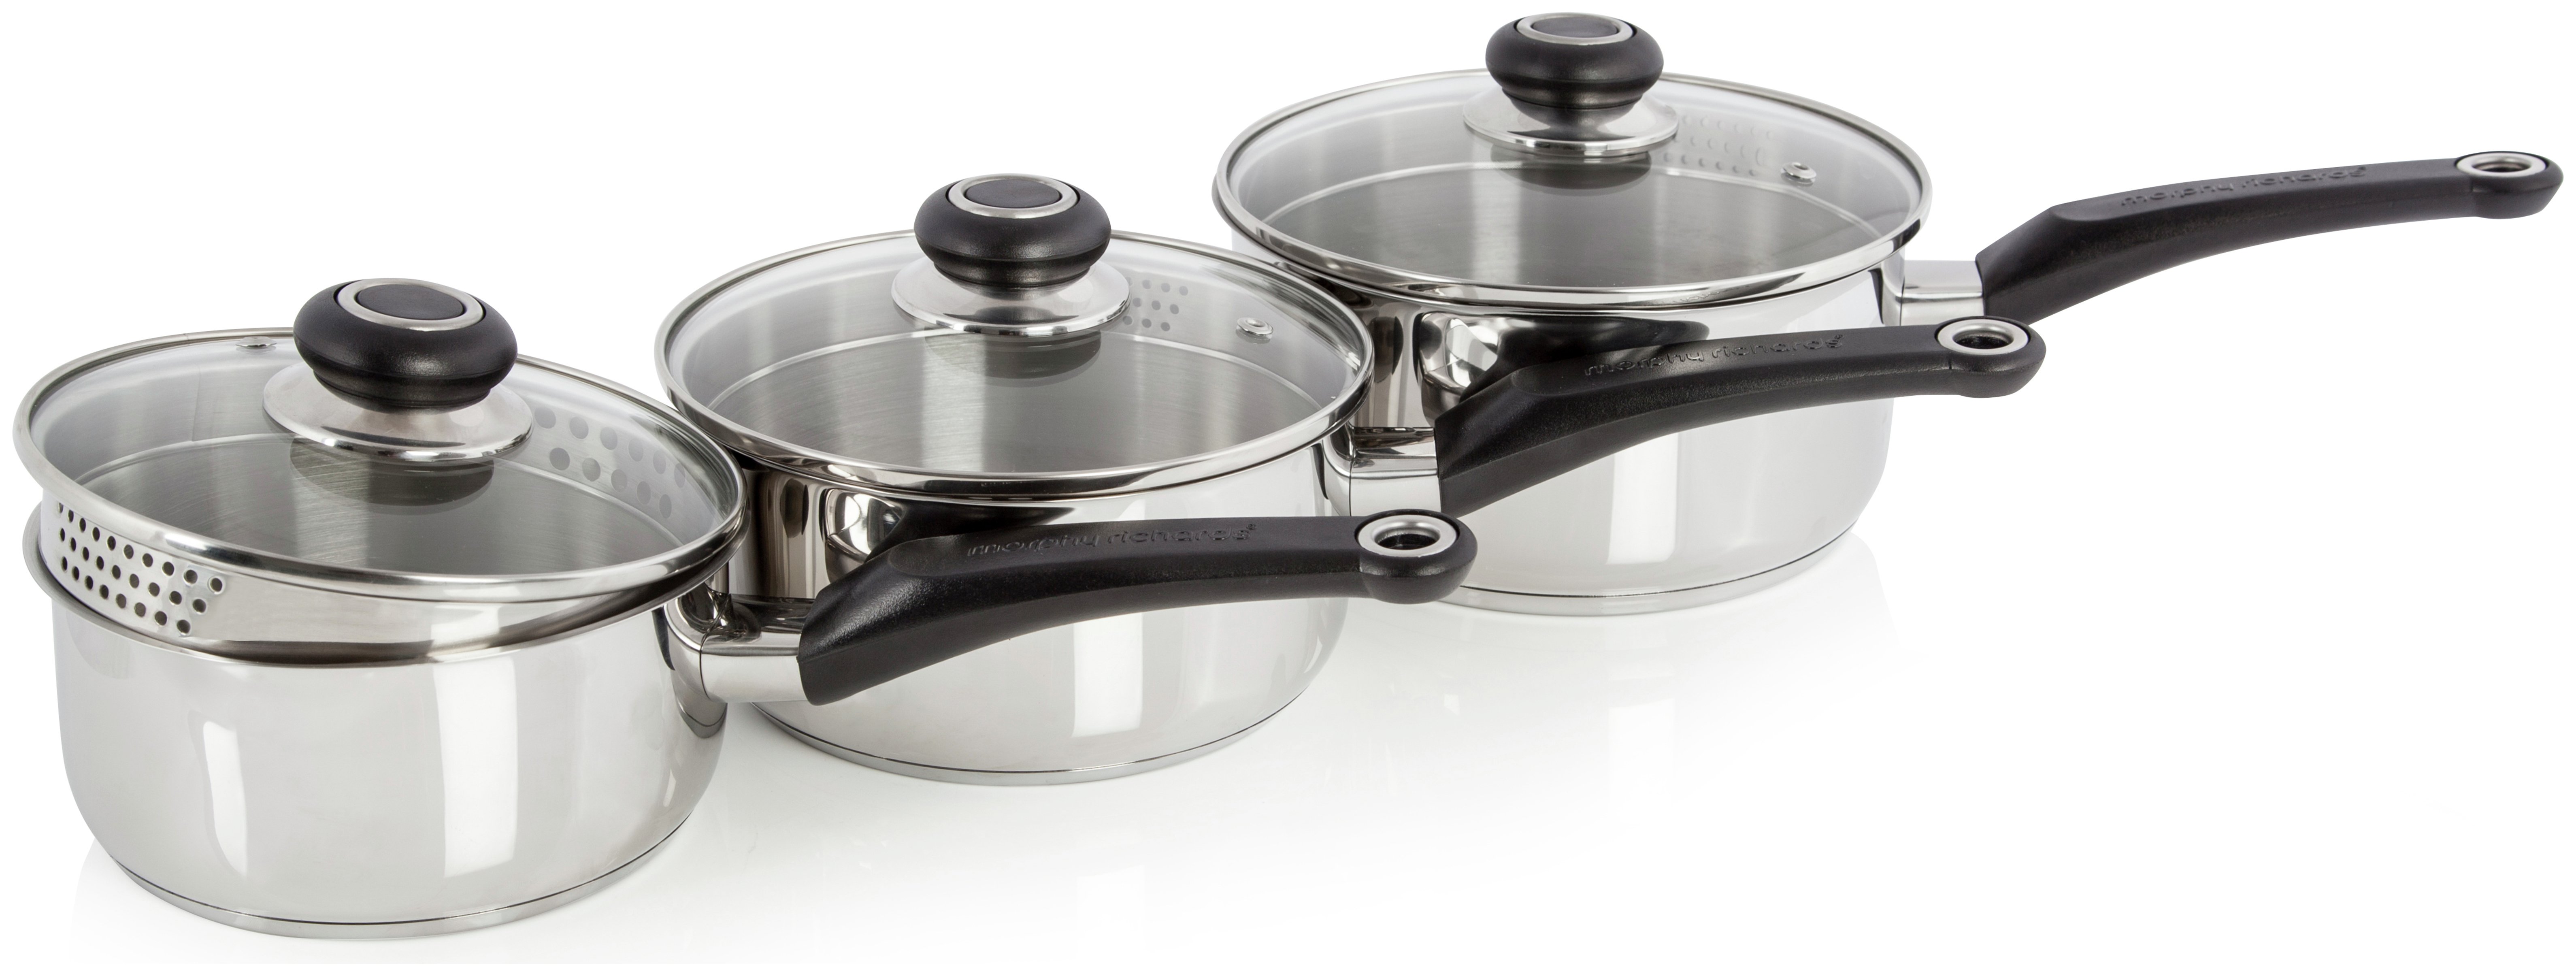 Morphy Richards Equip 3 Piece Stainless Steel Pan Set